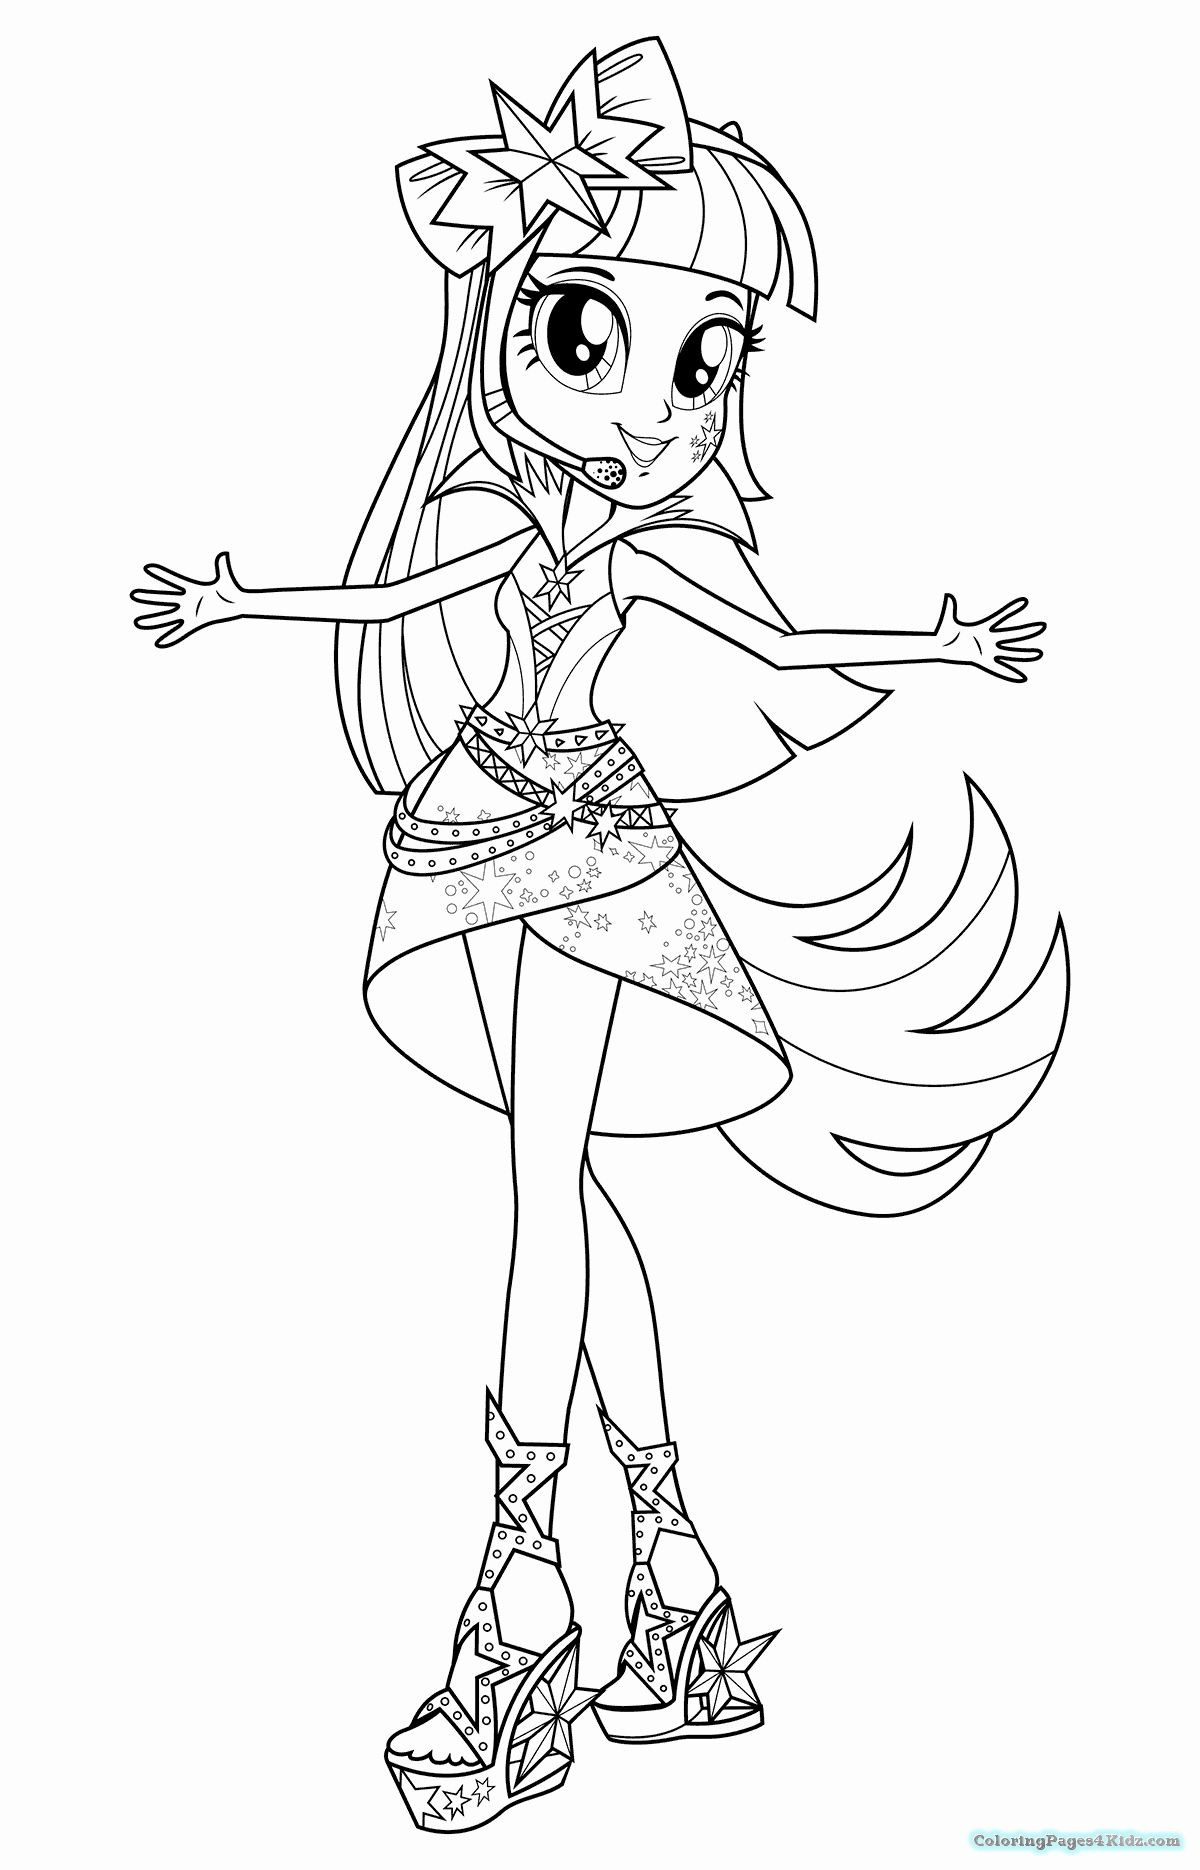 My Little Pony Girls Coloring Pages
 32 My Little Pony Equestria Girls Coloring Page in 2020